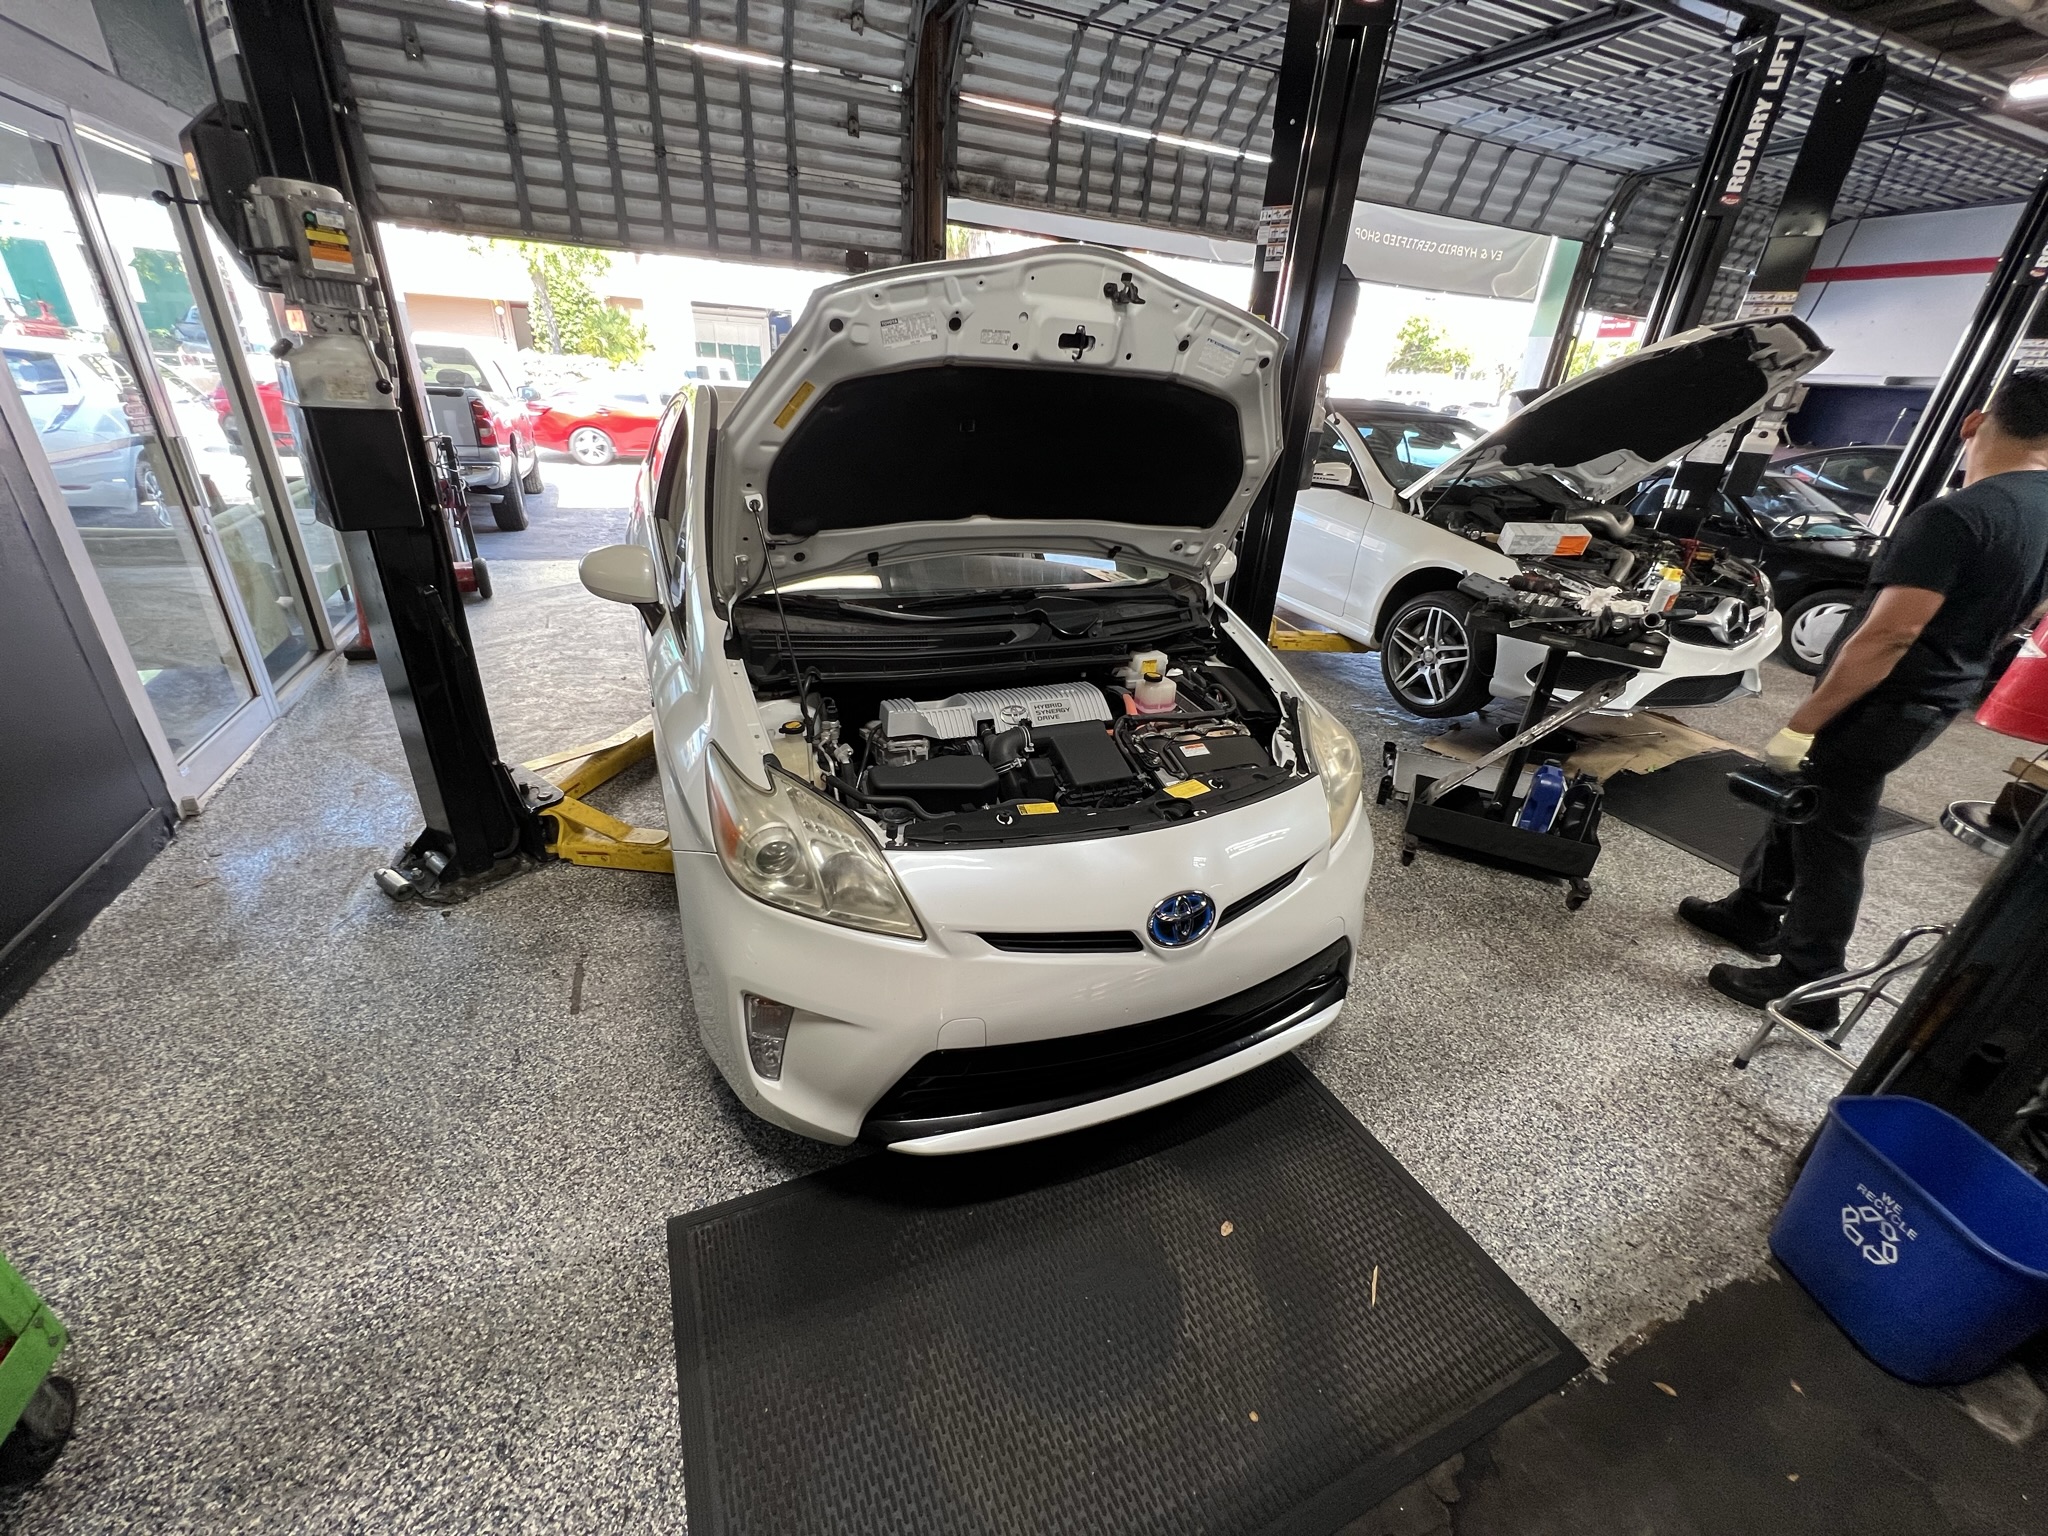 Toyota Repair and Services in Miami, FL | Green's Garage